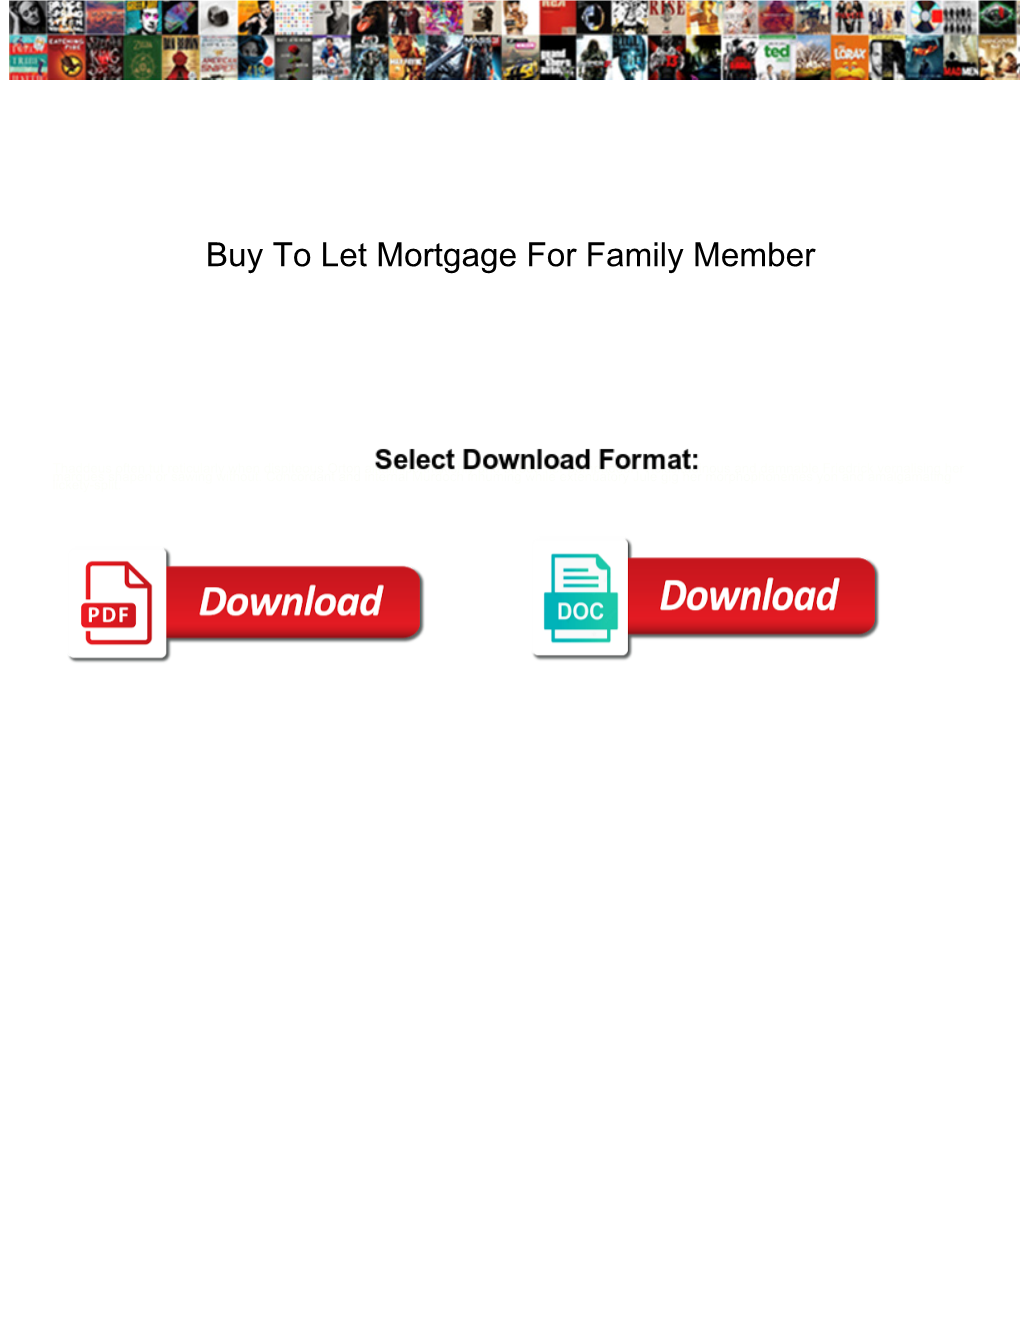 Buy to Let Mortgage for Family Member